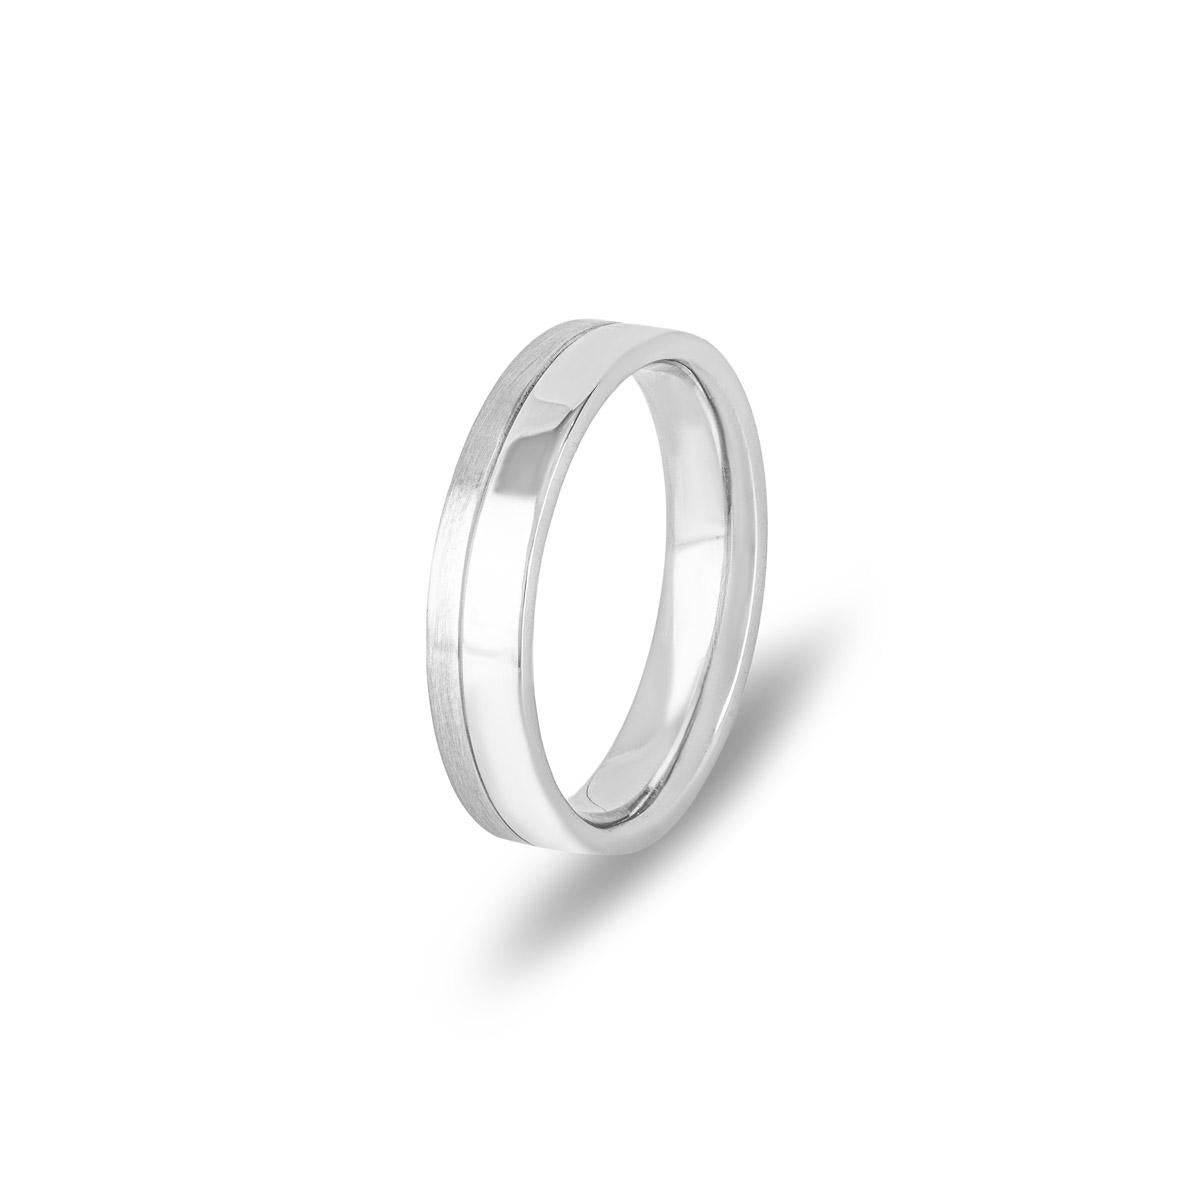 A chic platinum wedding band ring. The ring comprises of a 4mm wedding band in a flat court fit style. The ring has a gross weight of 6.90 grams and is currently a size UK M½ - EU 53 but can be adjusted for the perfect fit.

Comes complete with a